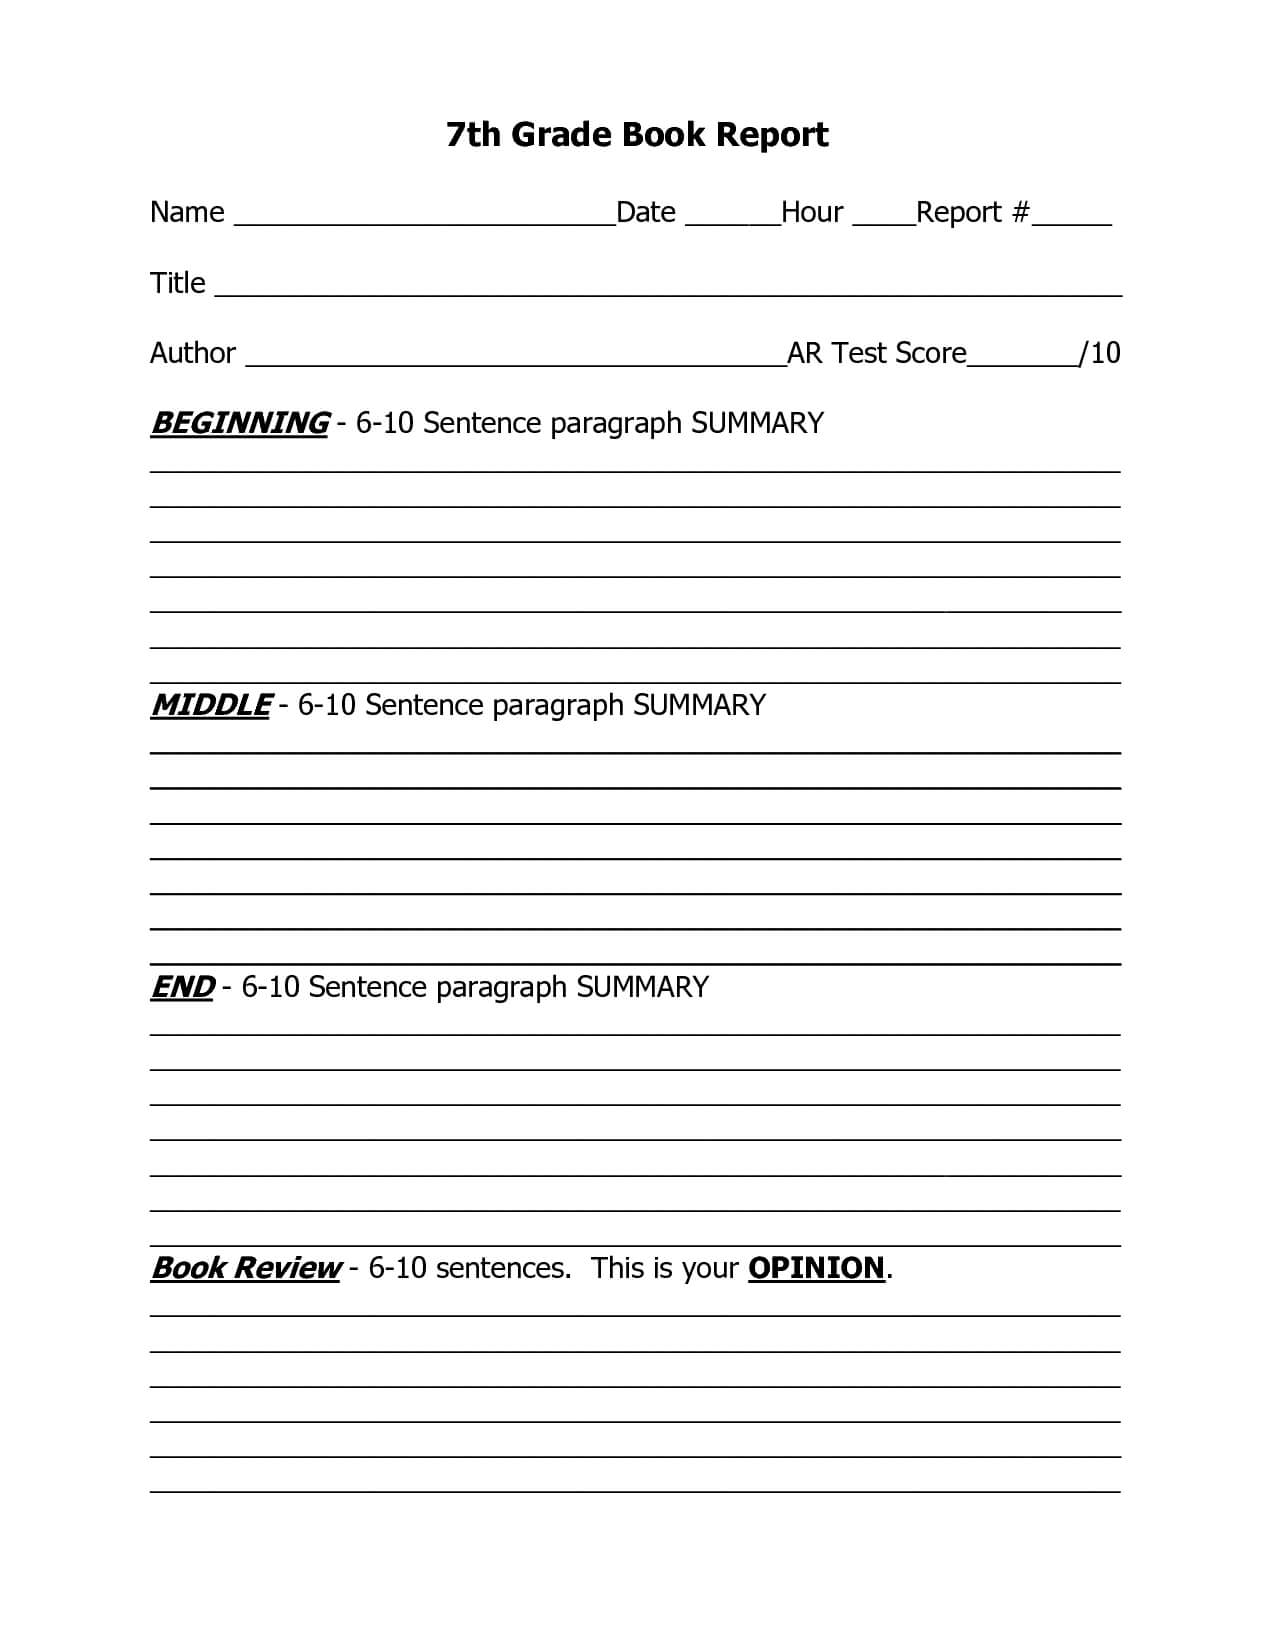 7Th Grade Book Report Outline Template | Kid Stuff | Book With Book Report Template In Spanish